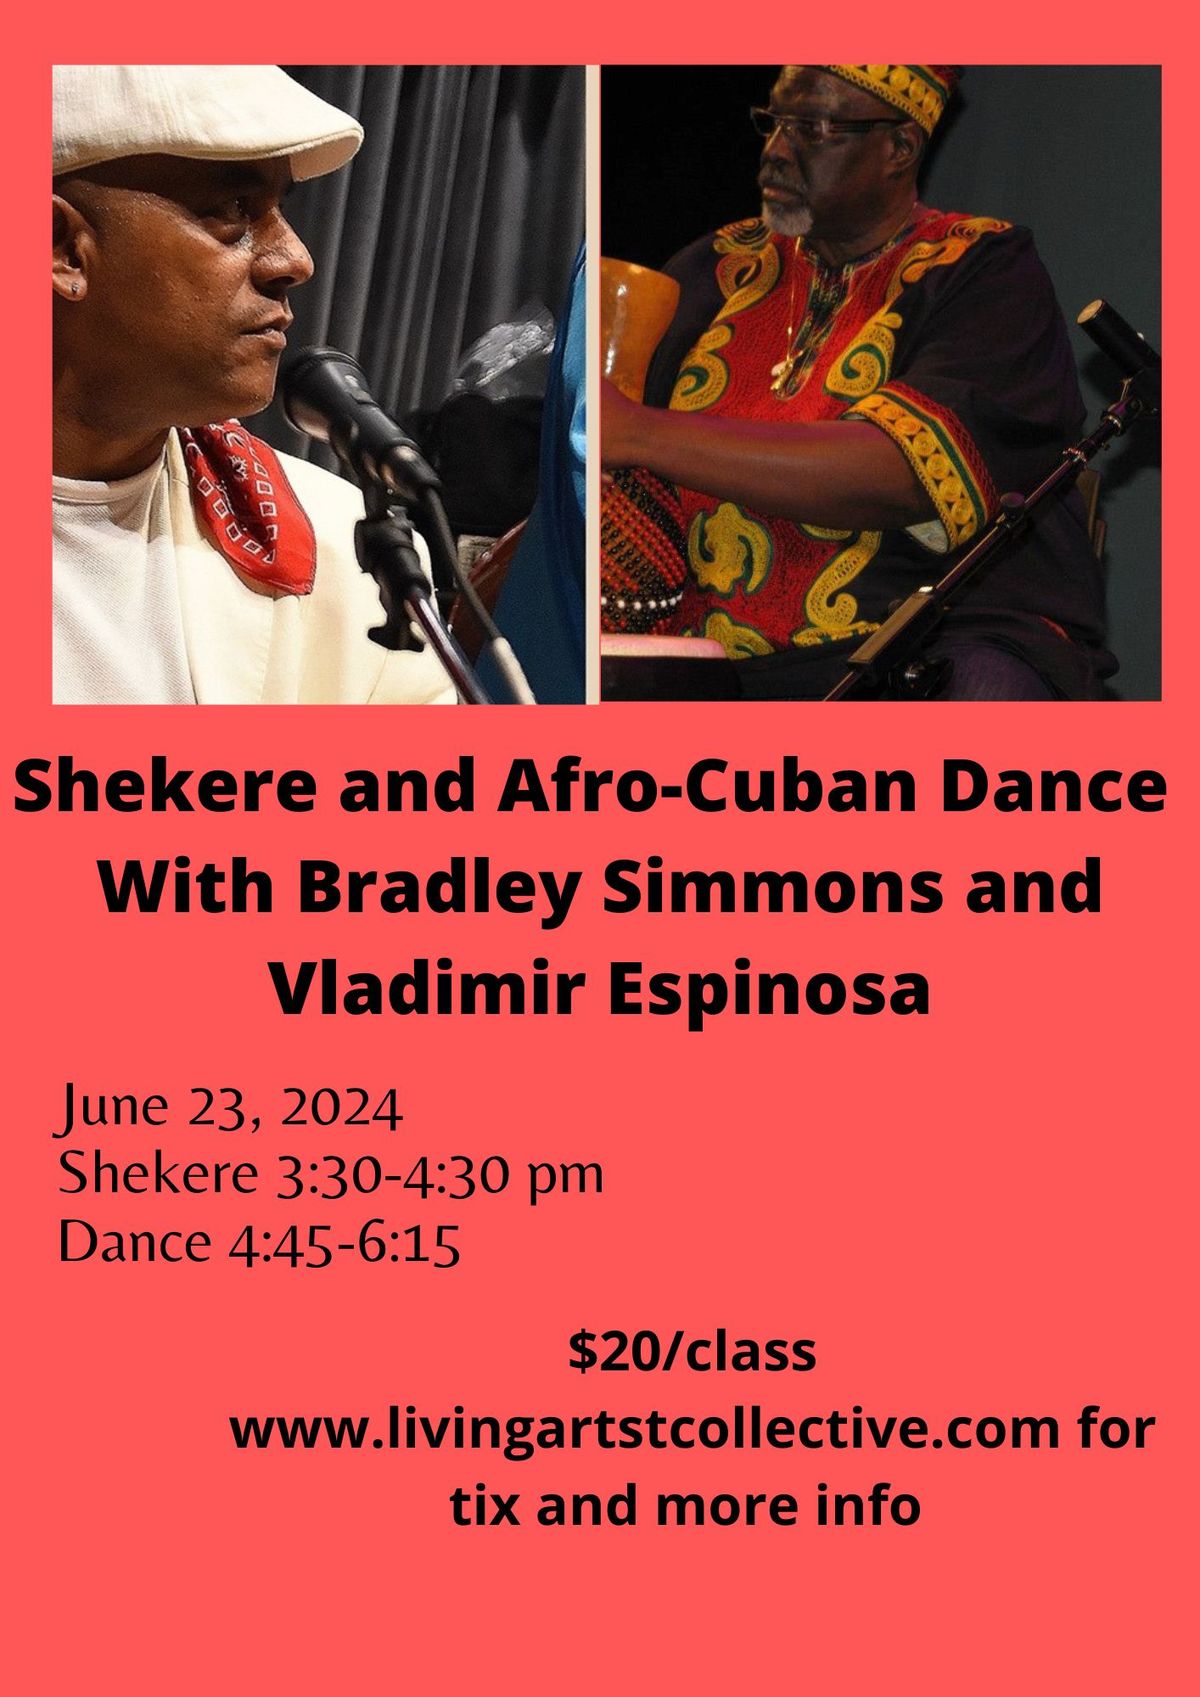 Shekere and Afrocuban Dance workshops with Baba Bradley Simmons and Baba Vladimir Espinosa